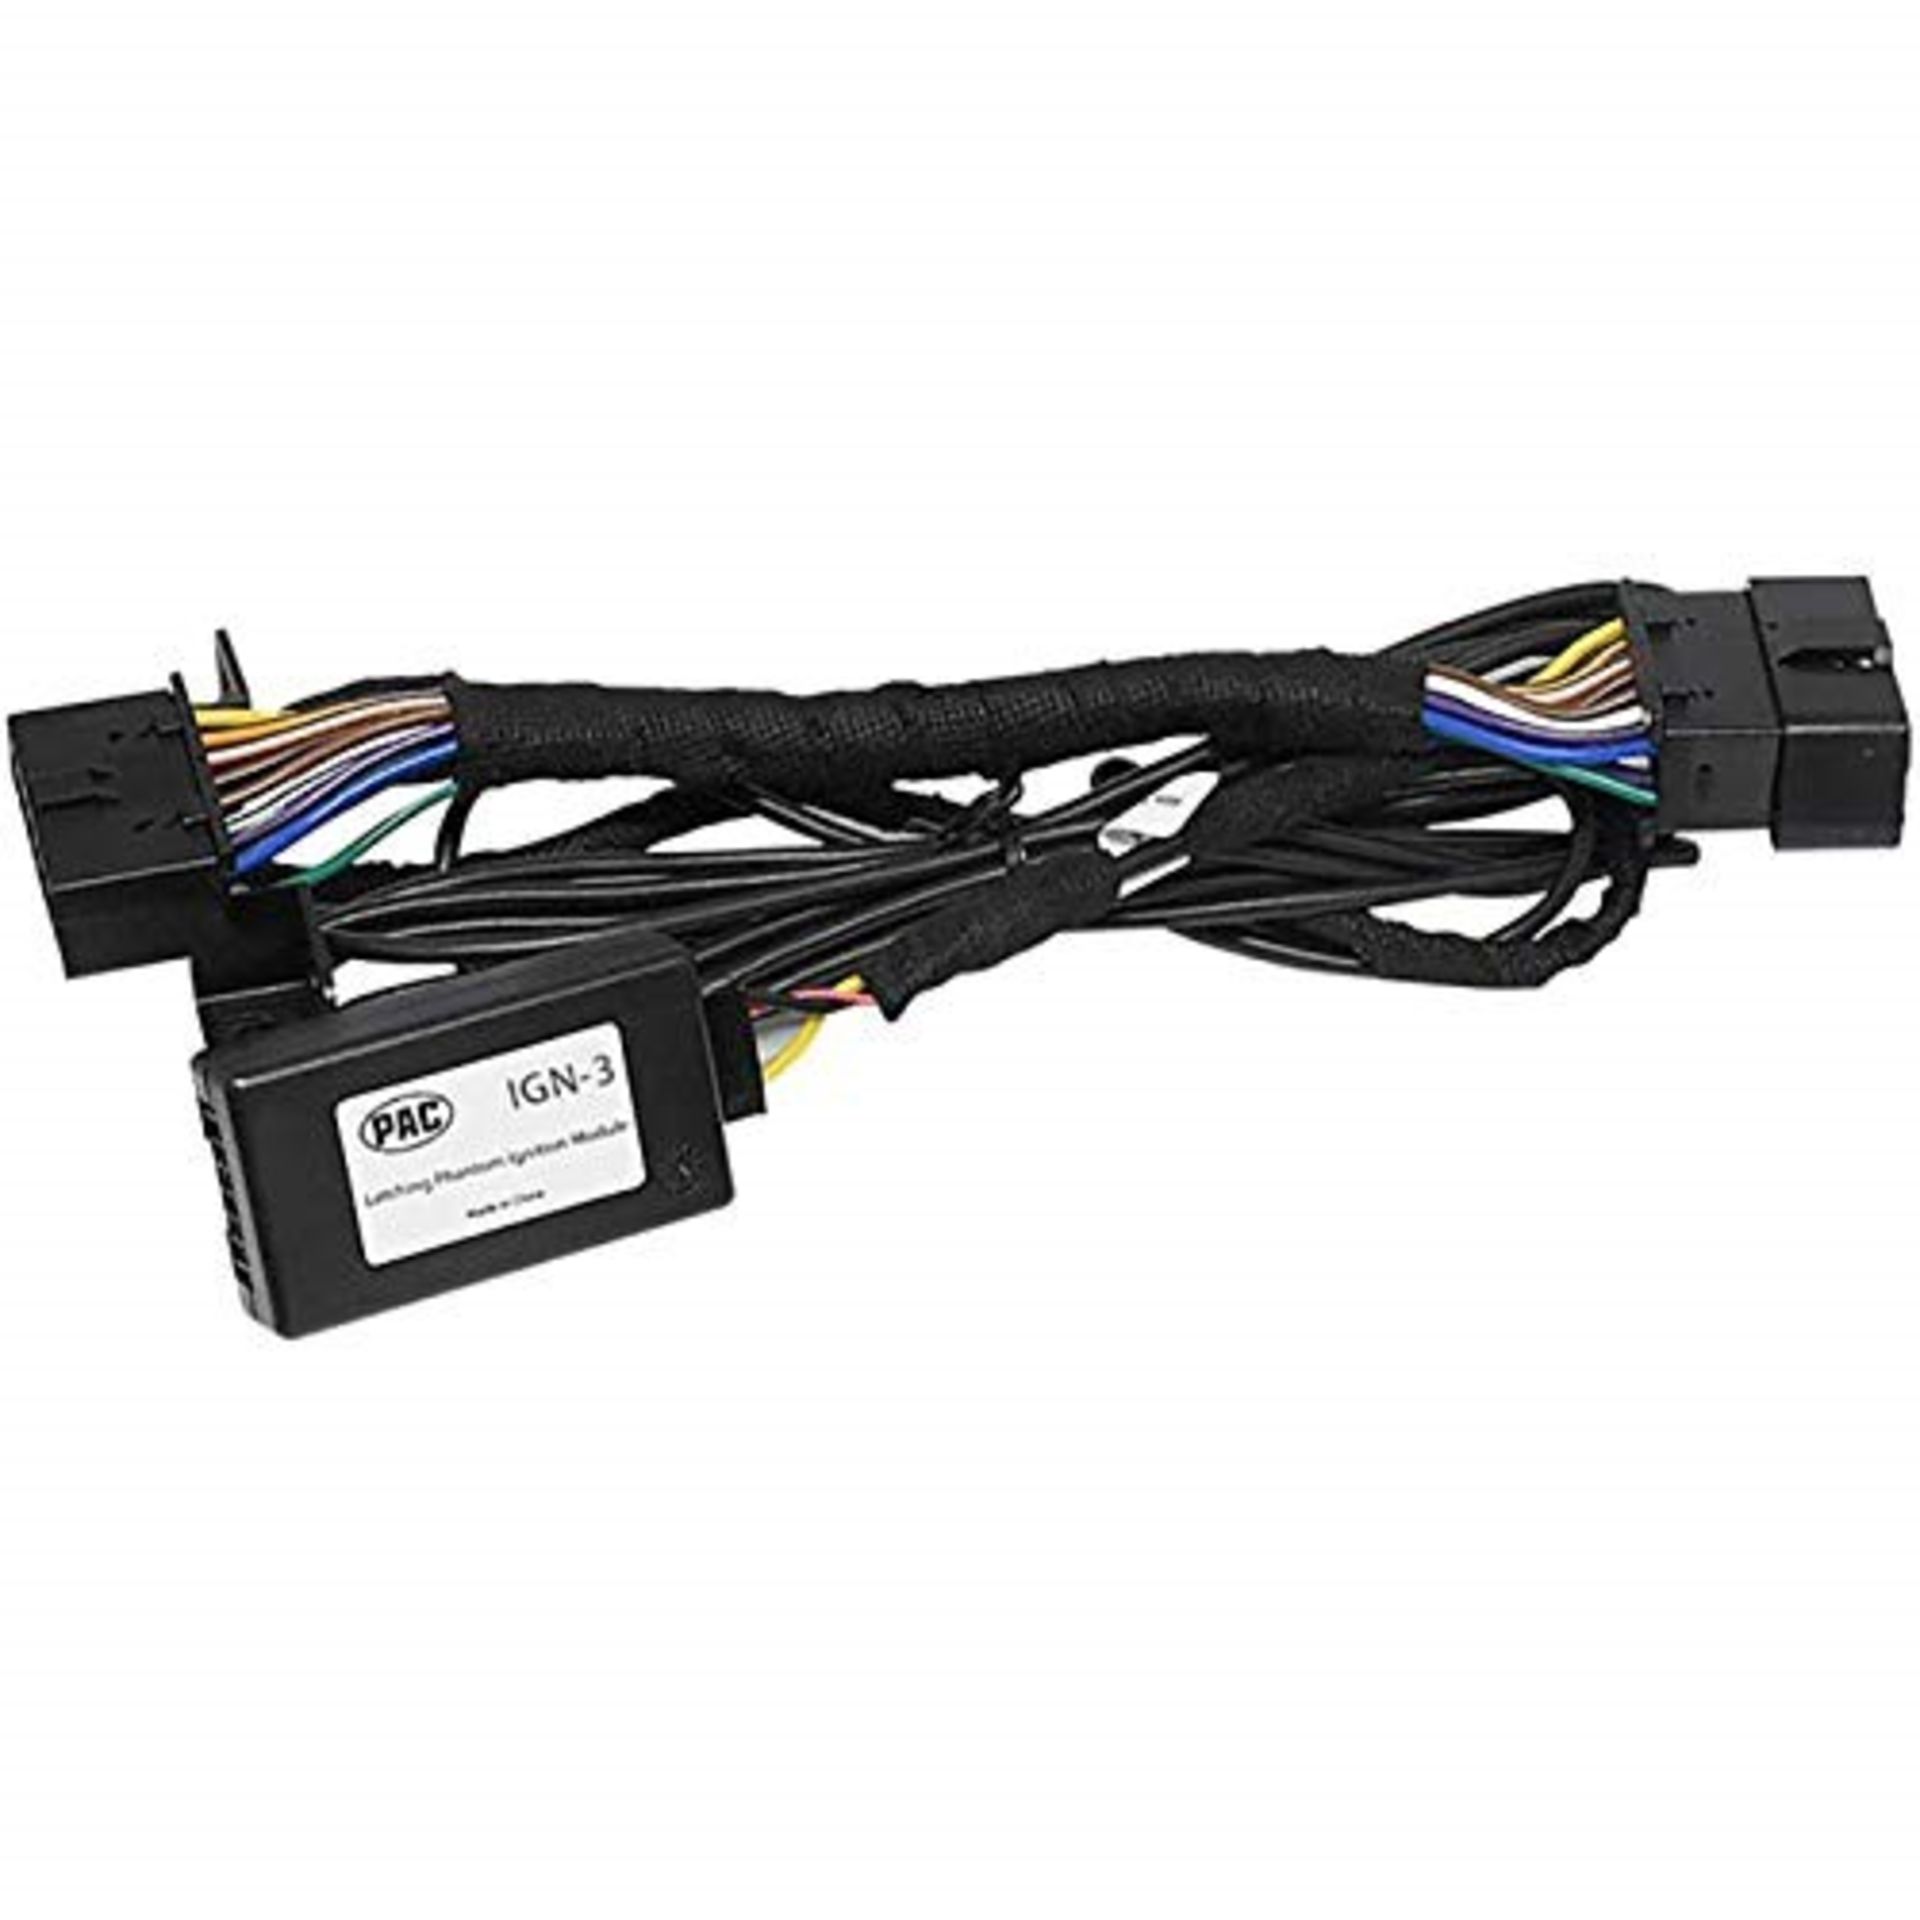 Thinkware OBD Installation Cable for Use On U100